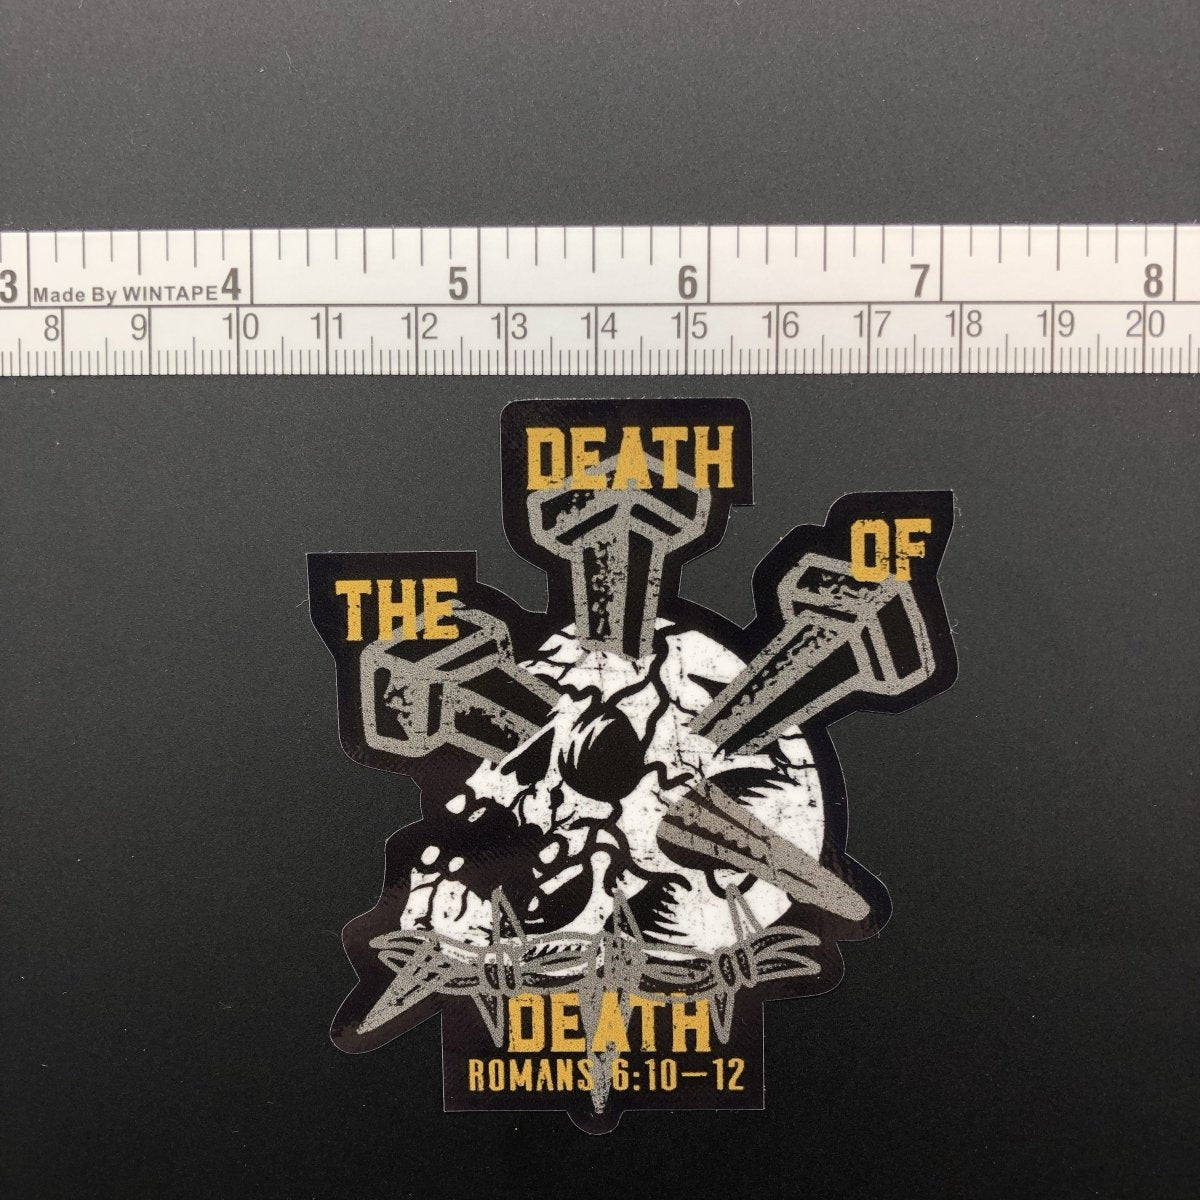 Decal - The Death of Death - Decal - The Reformed Sage - #reformed# - #reformed_gifts# - #christian_gifts#